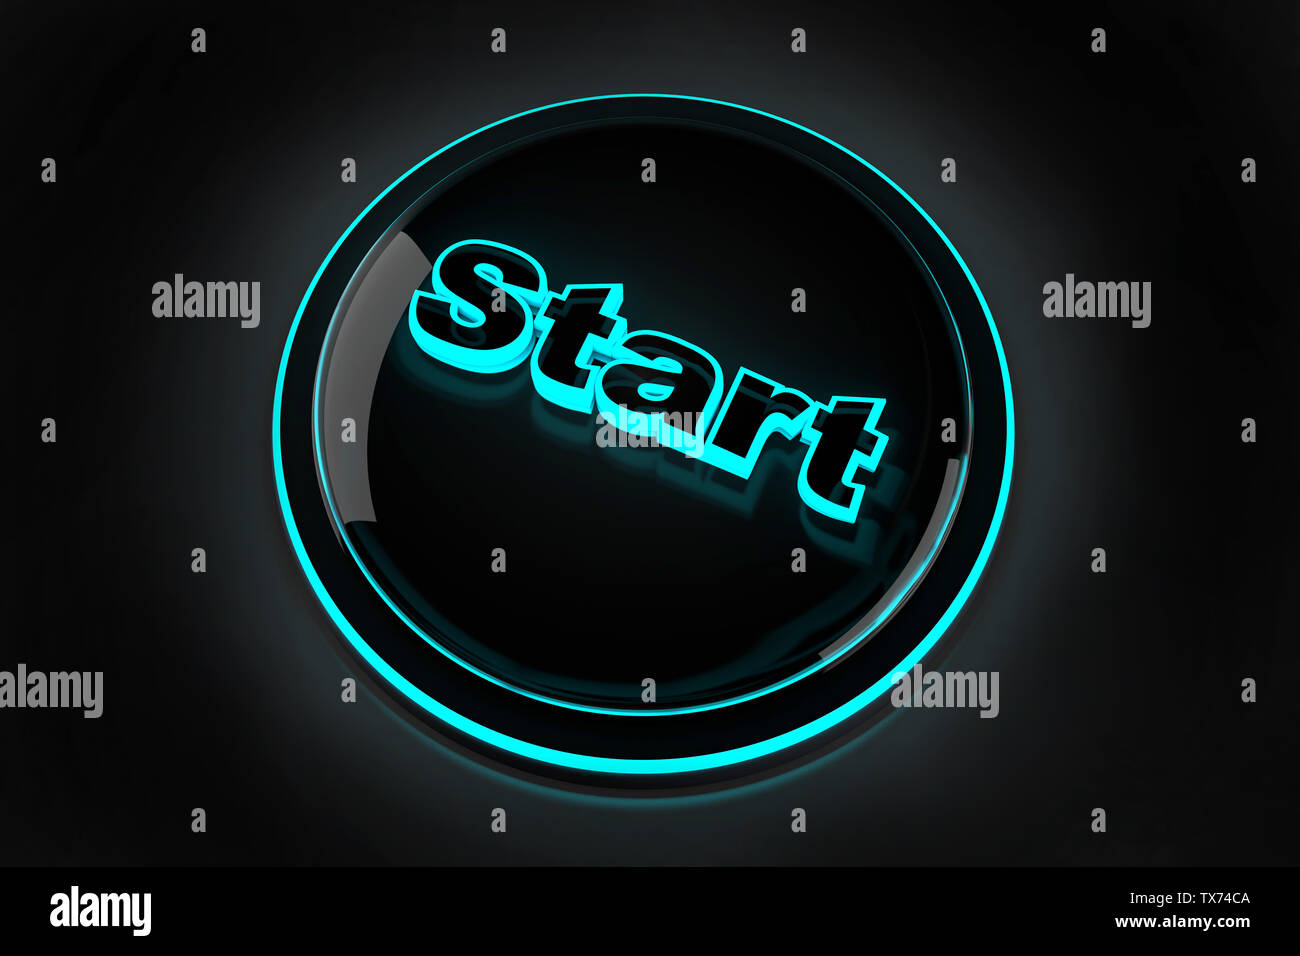 3D rendered illustration of a glowing Start button. Stock Photo